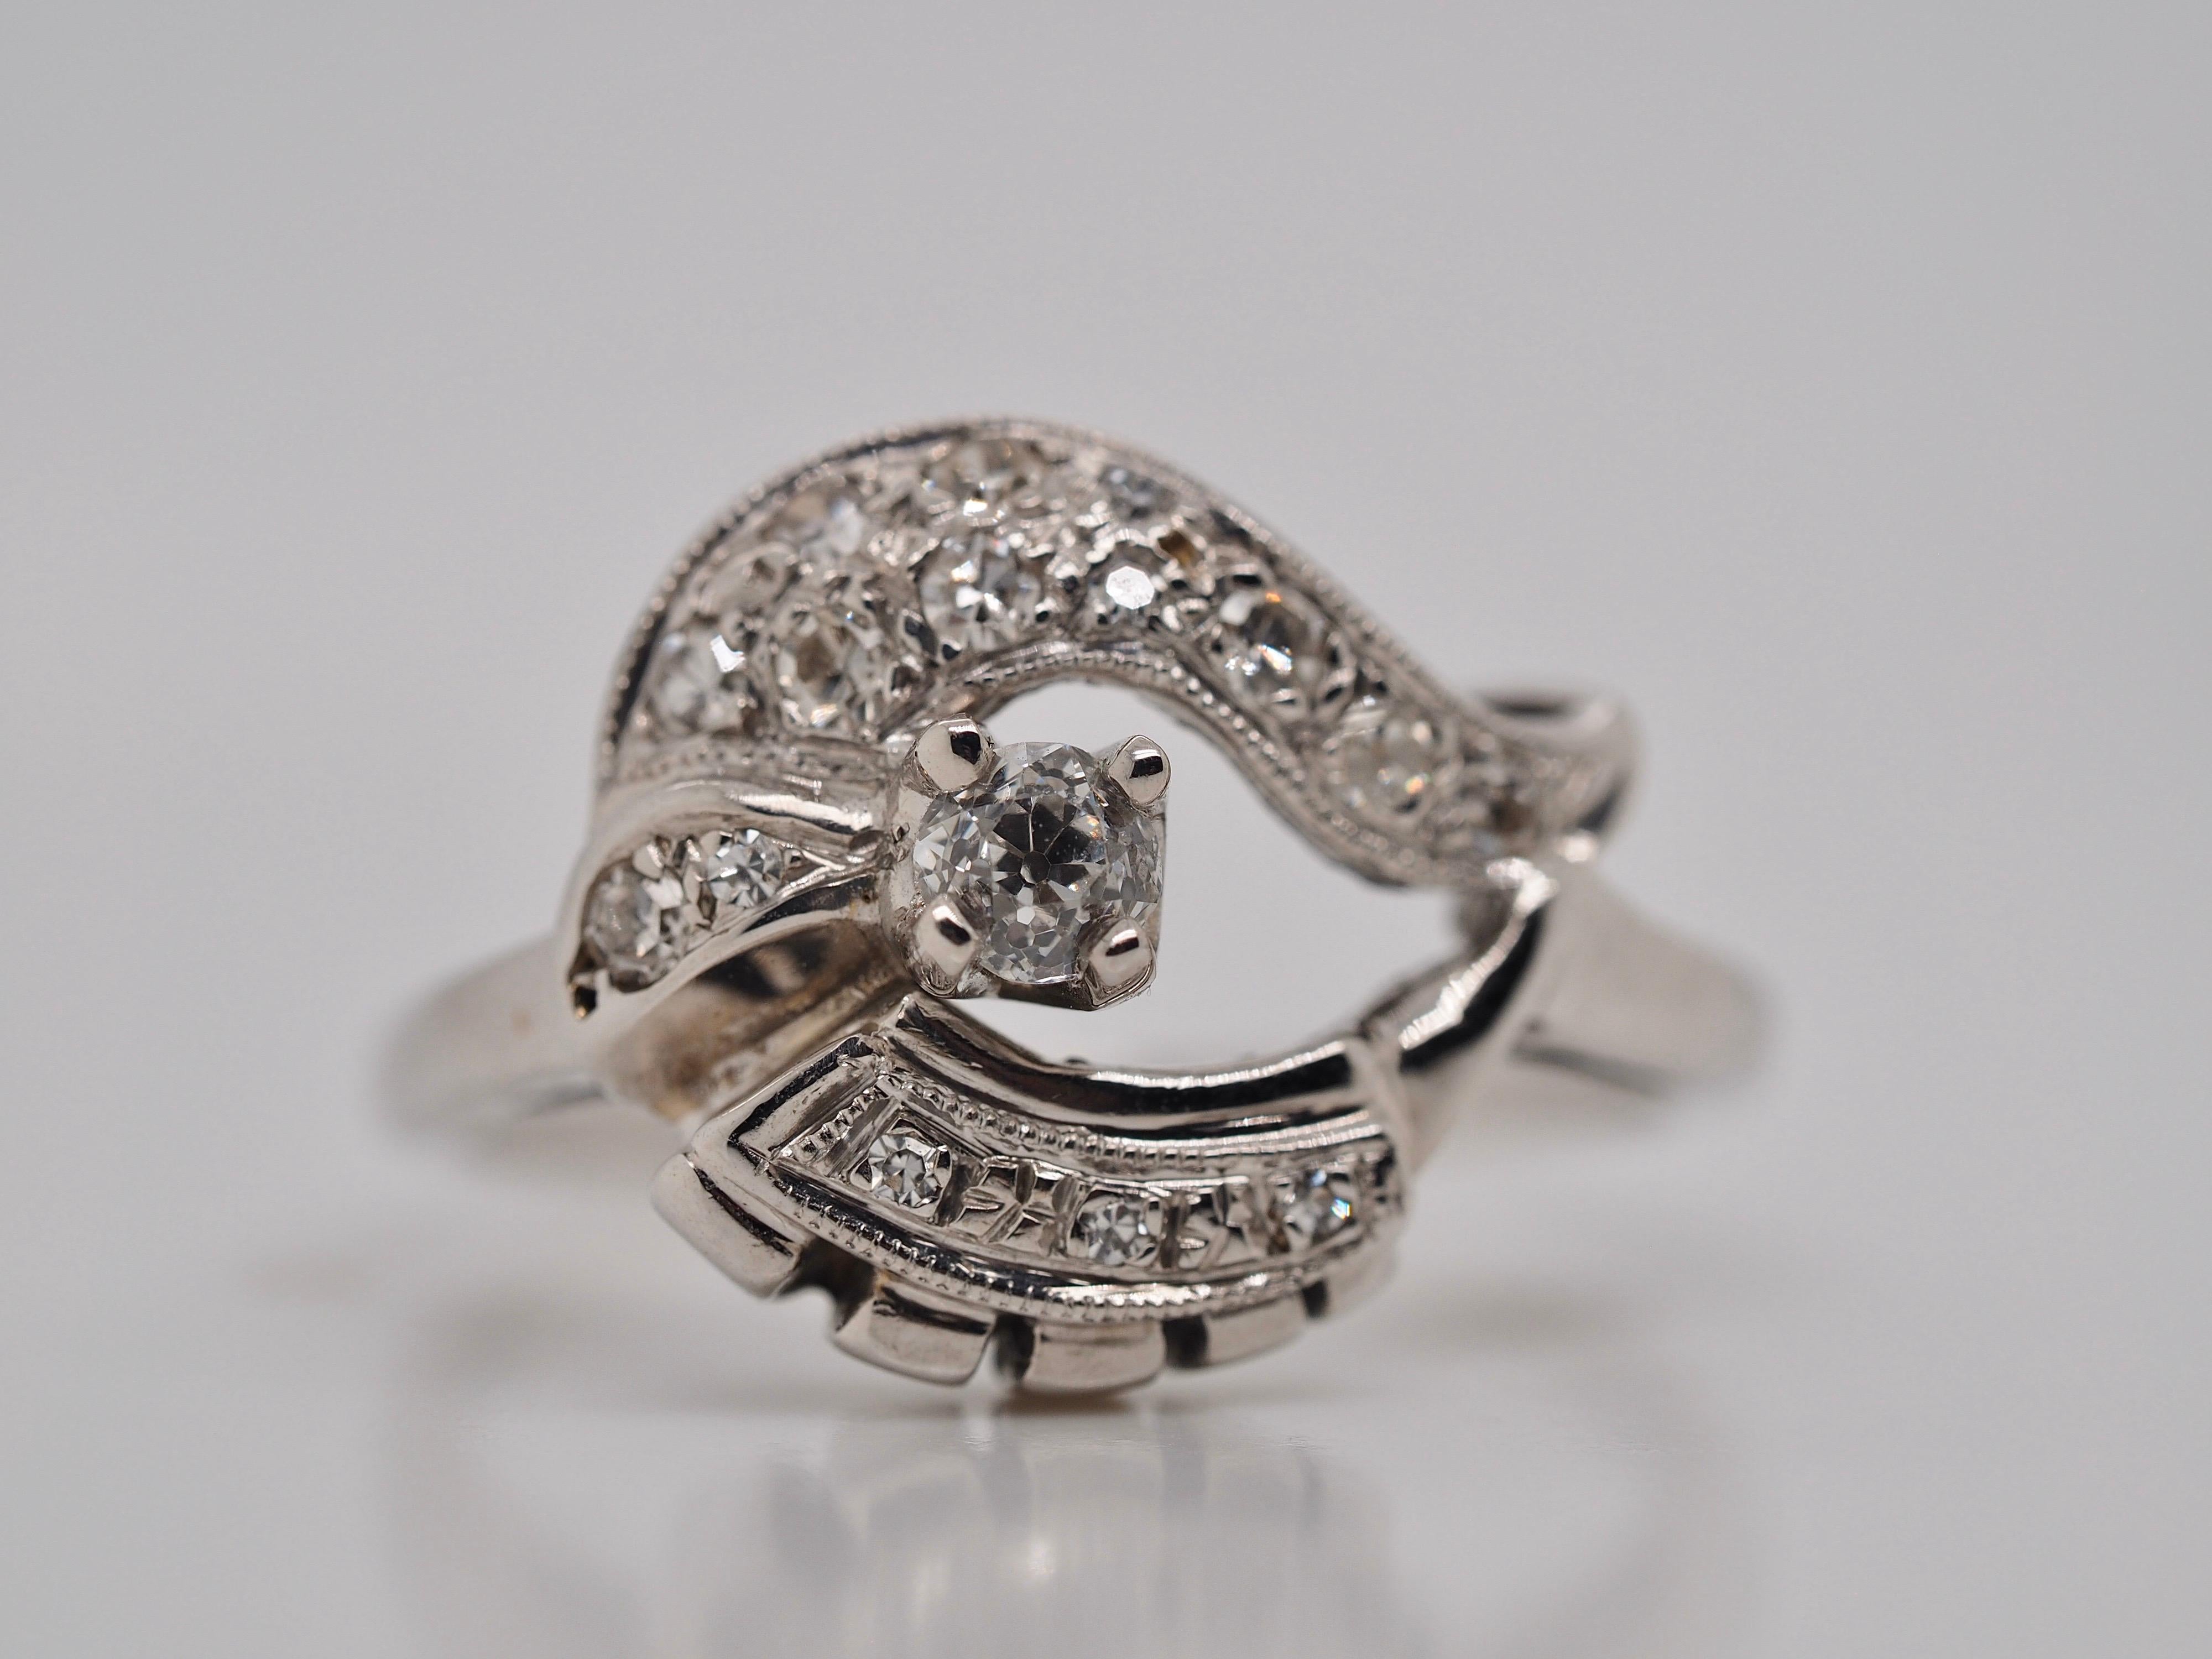 14 Karat White Gold Art Deco Vintage cocktail ring features an Old Mine Cut Diamond weighing  0.19 carats VS2 clarity, H-I in color. It is swirled by fifteen accented single cut Diamonds weighing approximately 0.15 carats total weight VS - I 1